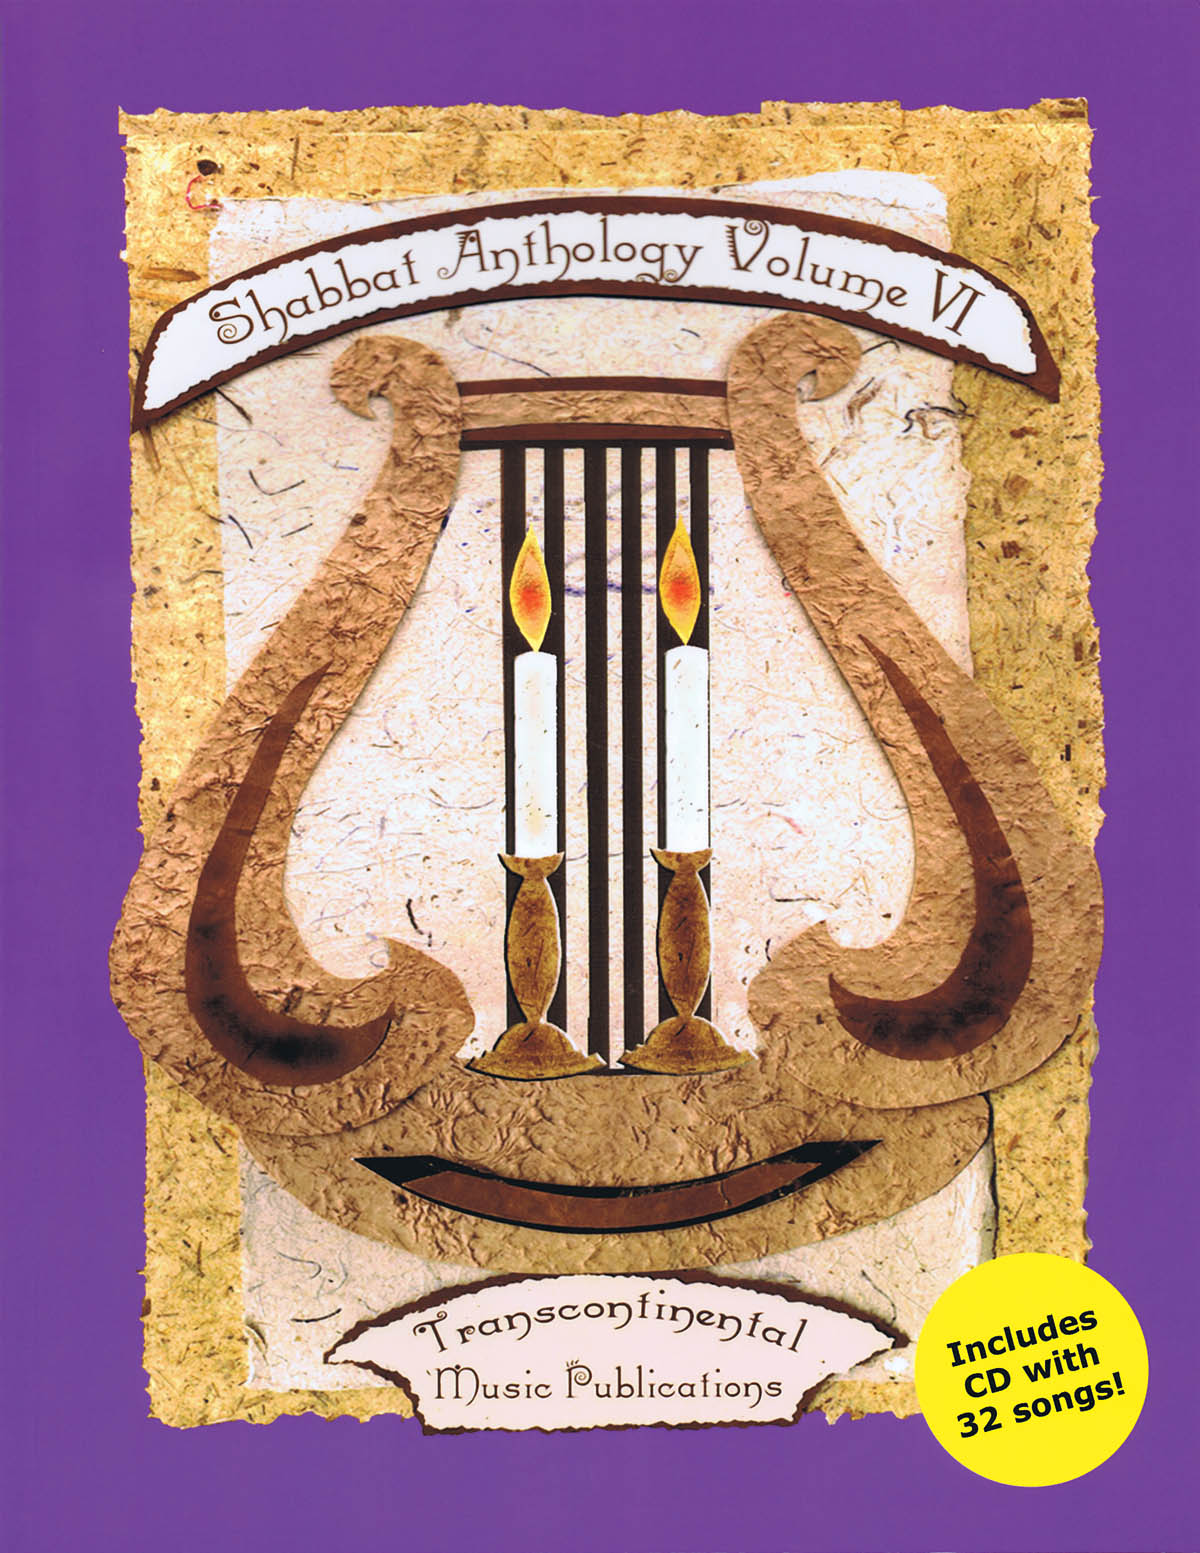 Shabbat Anthology Vol. VI: Piano  Vocal and Guitar: Mixed Songbook